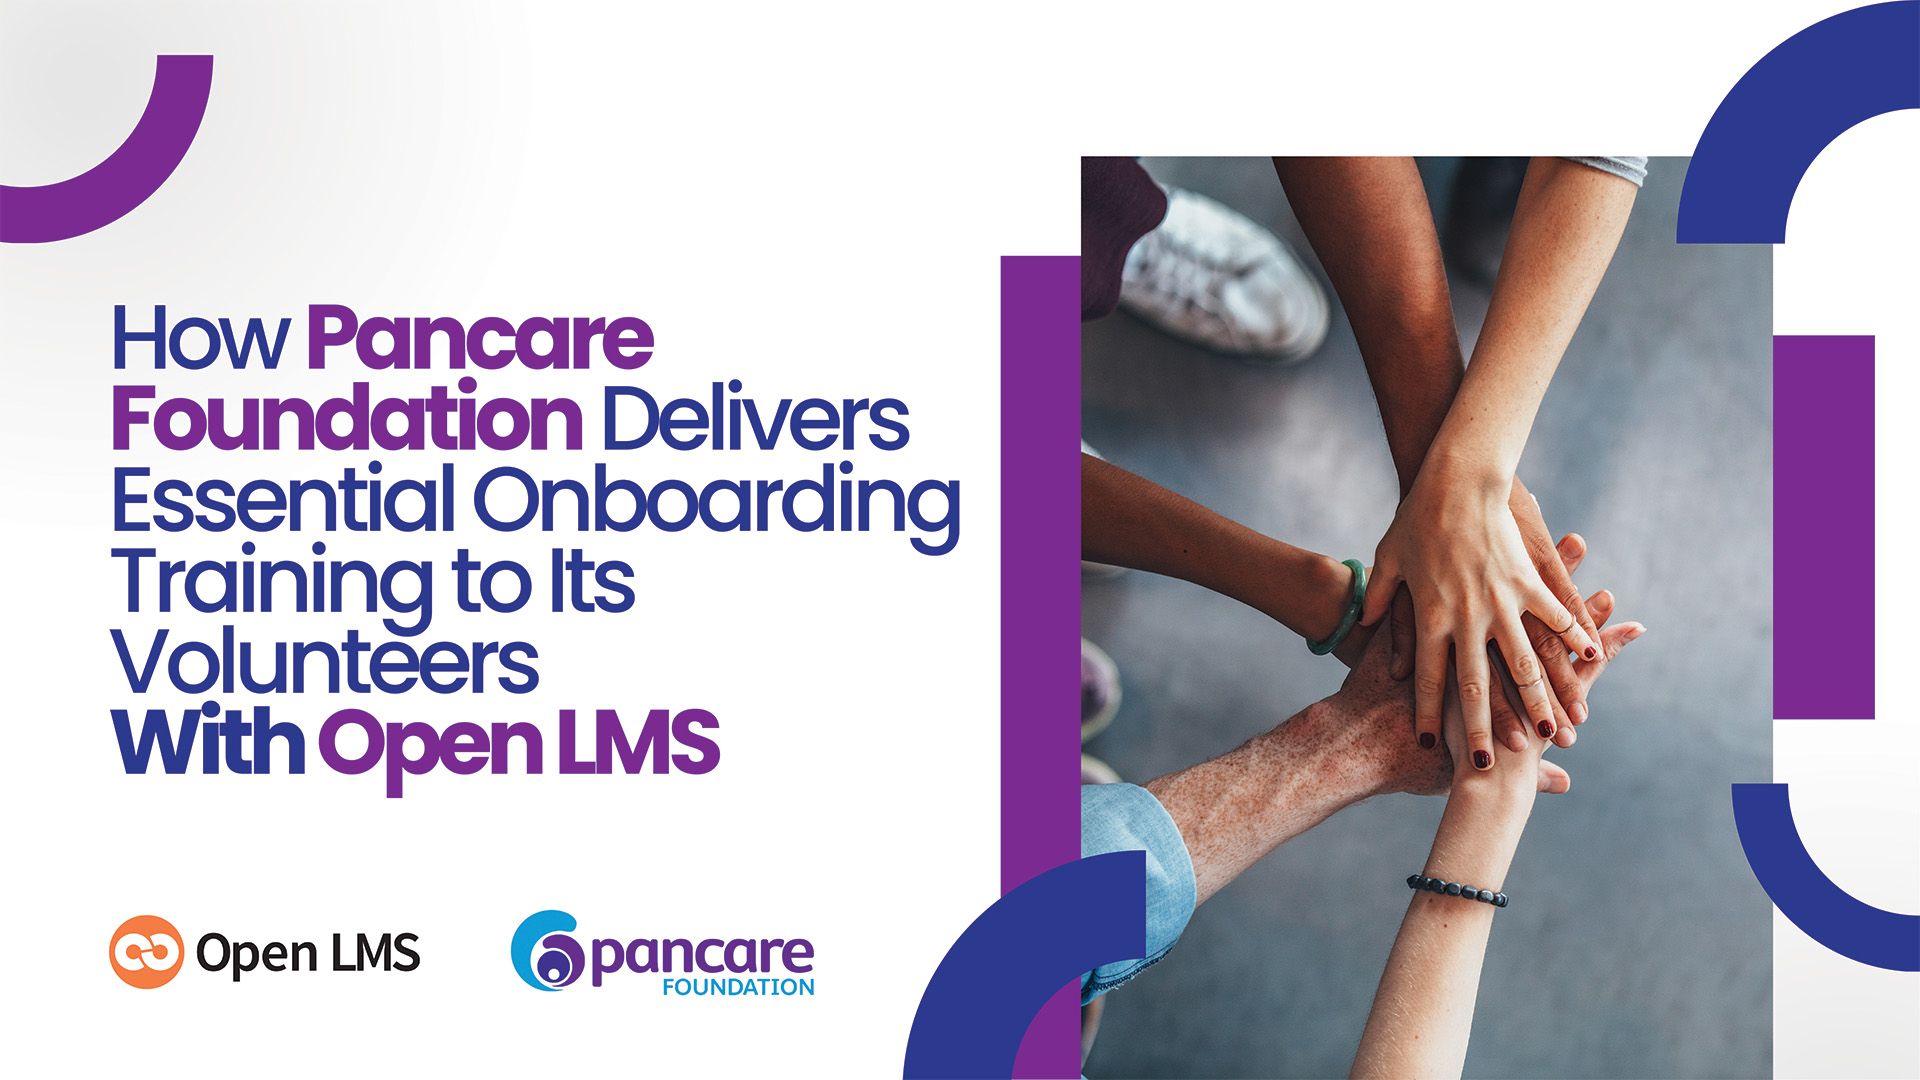 How Pancare Foundation Delivers Essential Onboarding Training to Its Volunteers With Open LMS